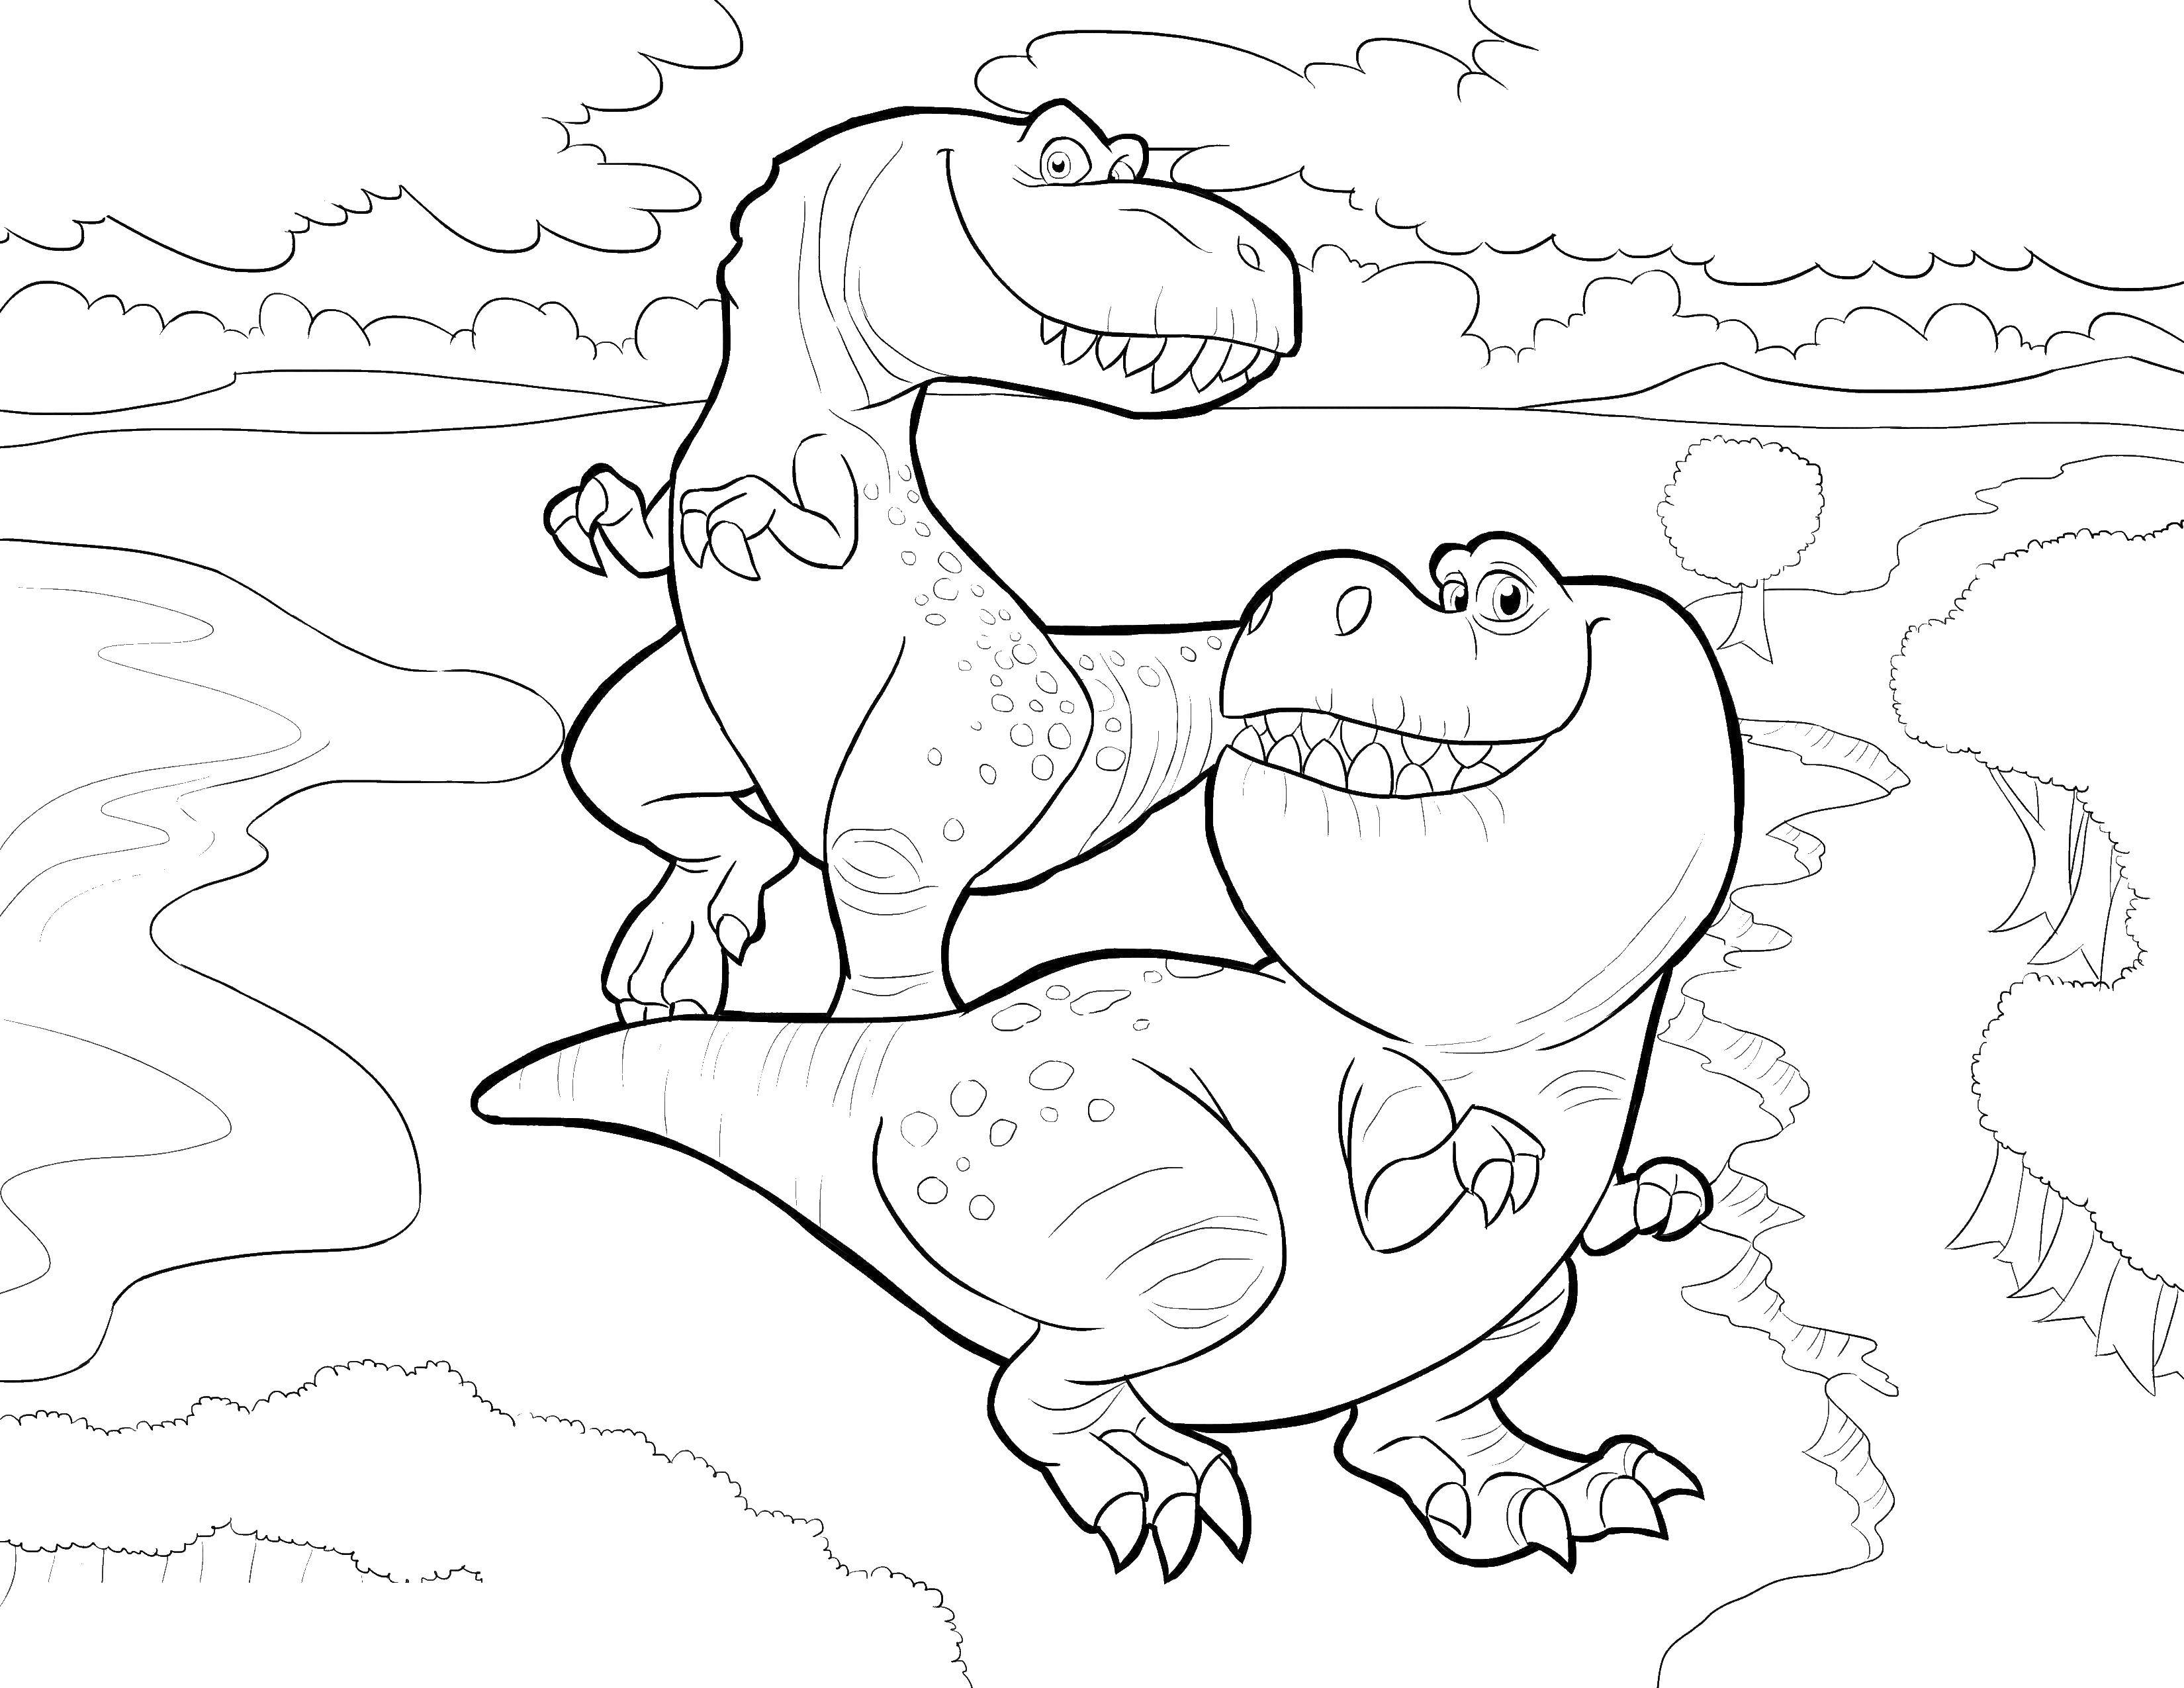 Coloring Dinosaurs from the movie. Category dinosaur. Tags:  dinosaurs.